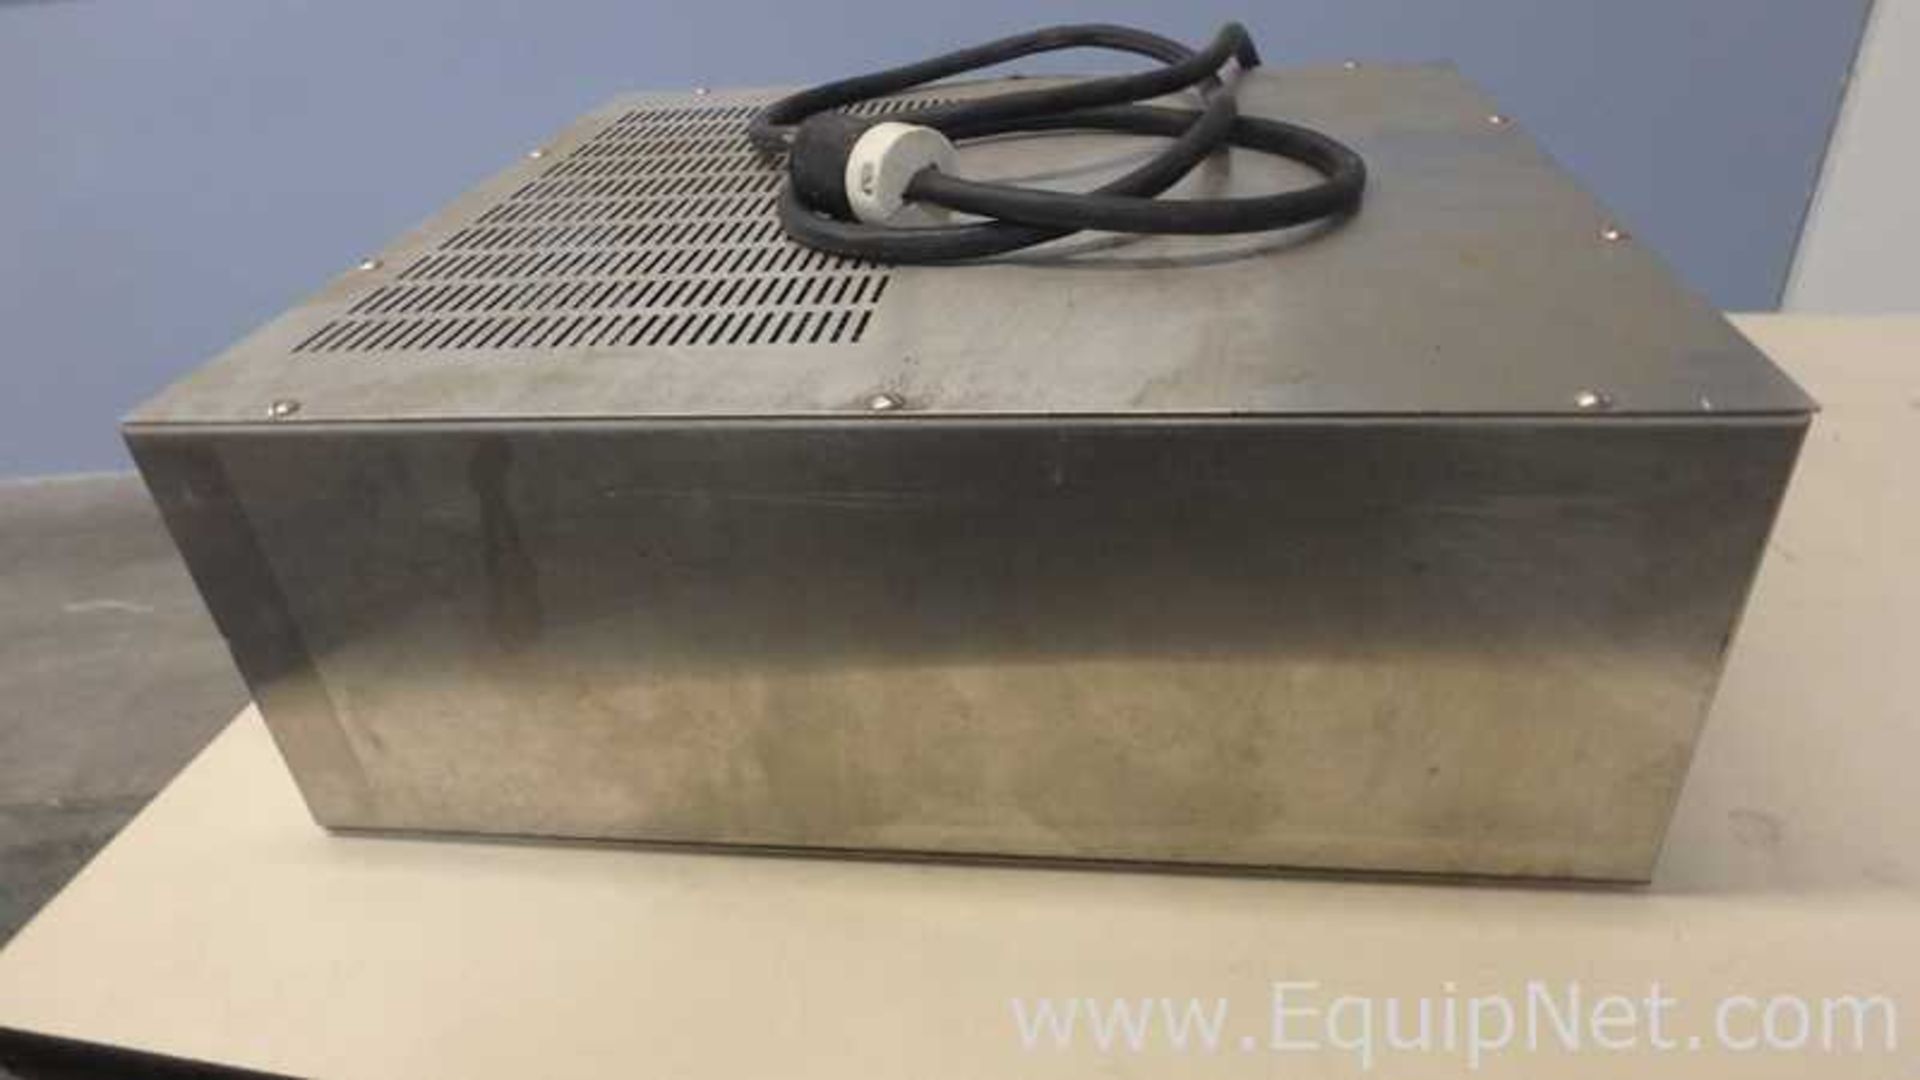 ESMA Inc. E700 Ultrasonic Cleaning System with E997 30Gal Heated Storage Tank - Image 22 of 38